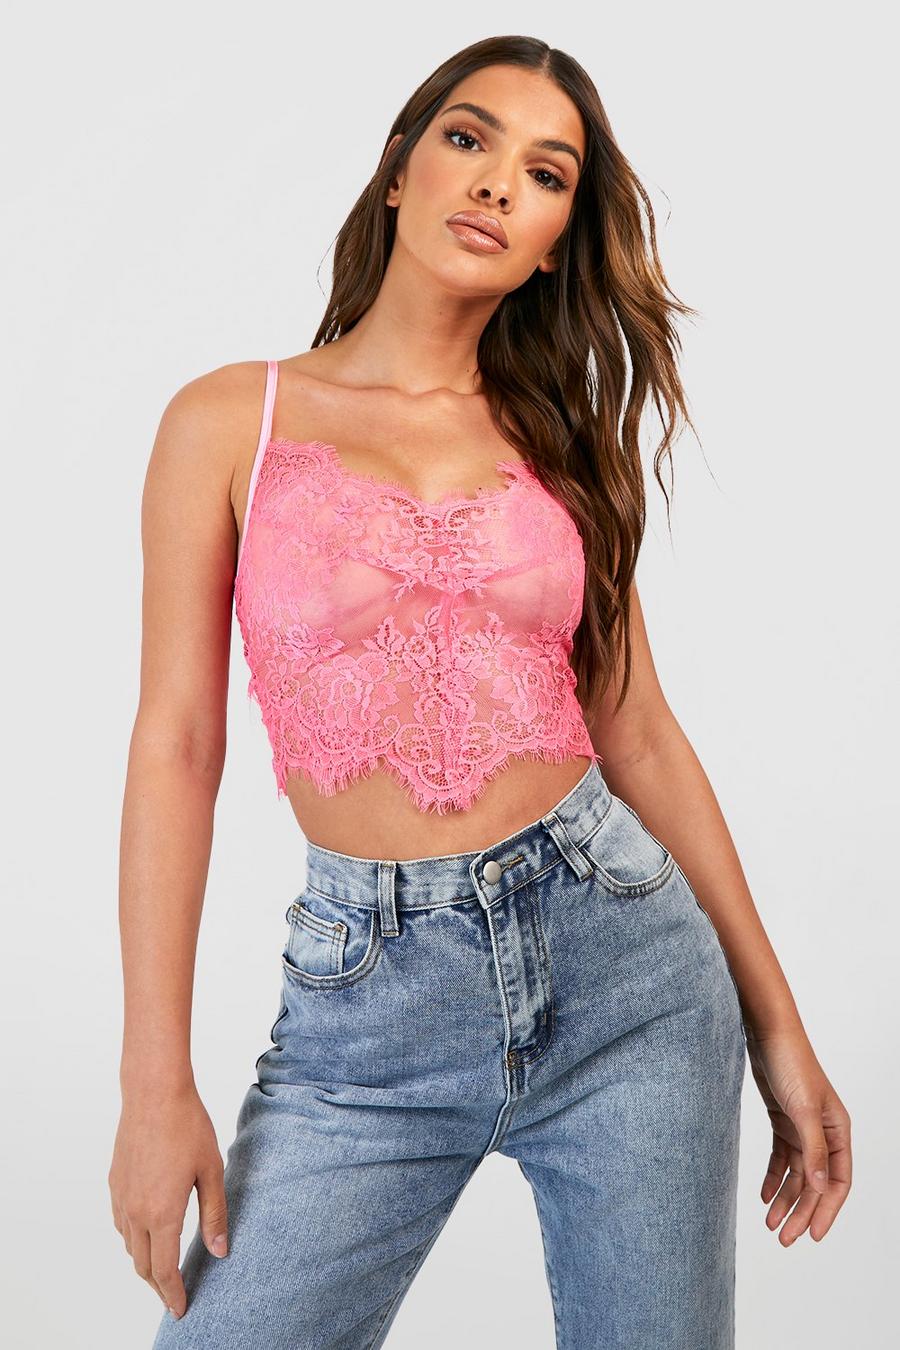 Boohoo Lime Green Lace Bralette Crop Top Price in India, Full  Specifications & Offers